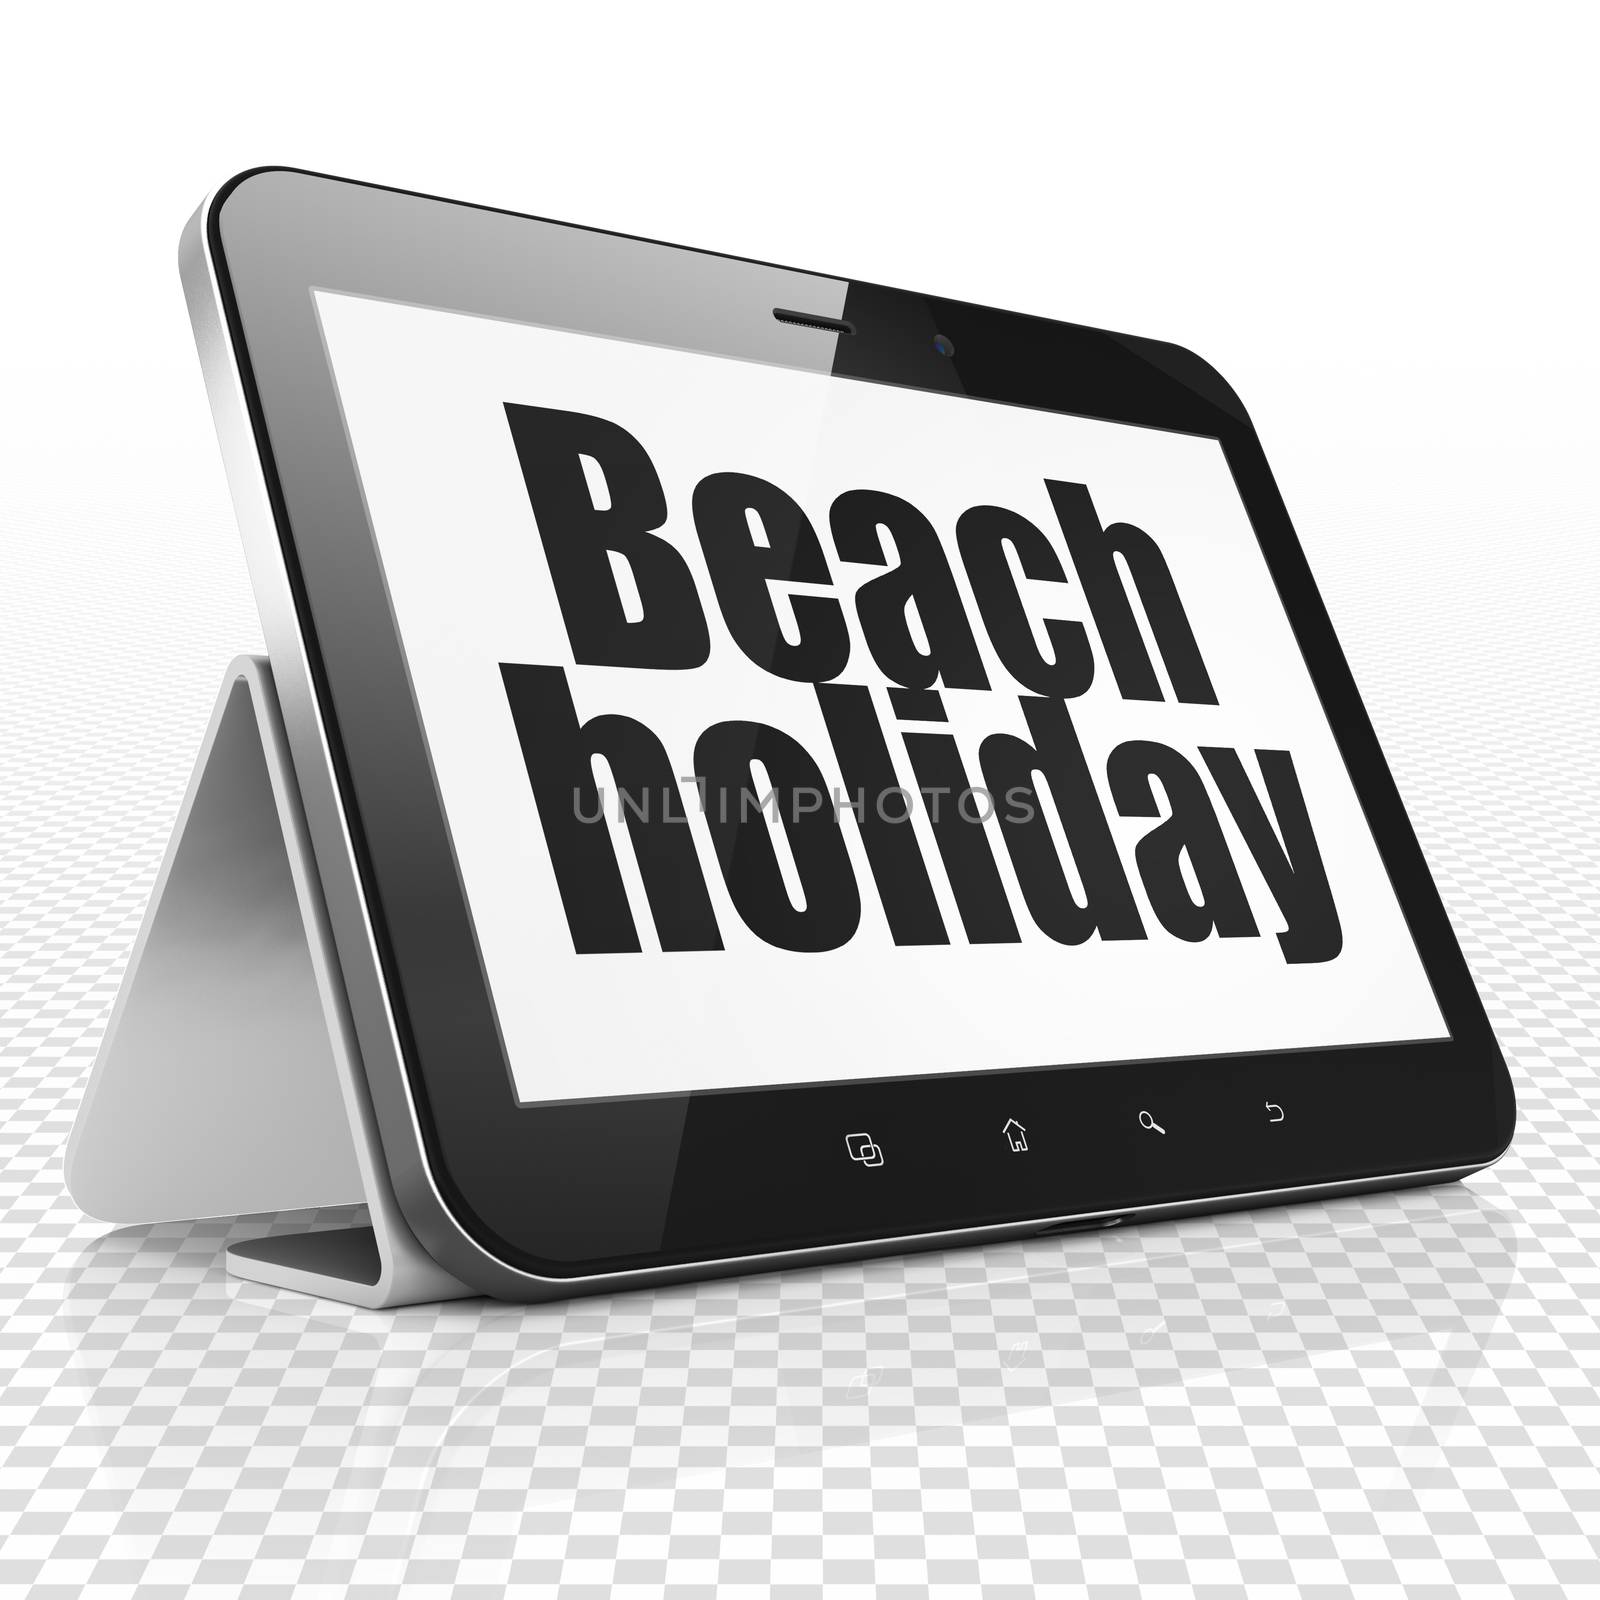 Travel concept: Tablet Computer with Beach Holiday on display by maxkabakov